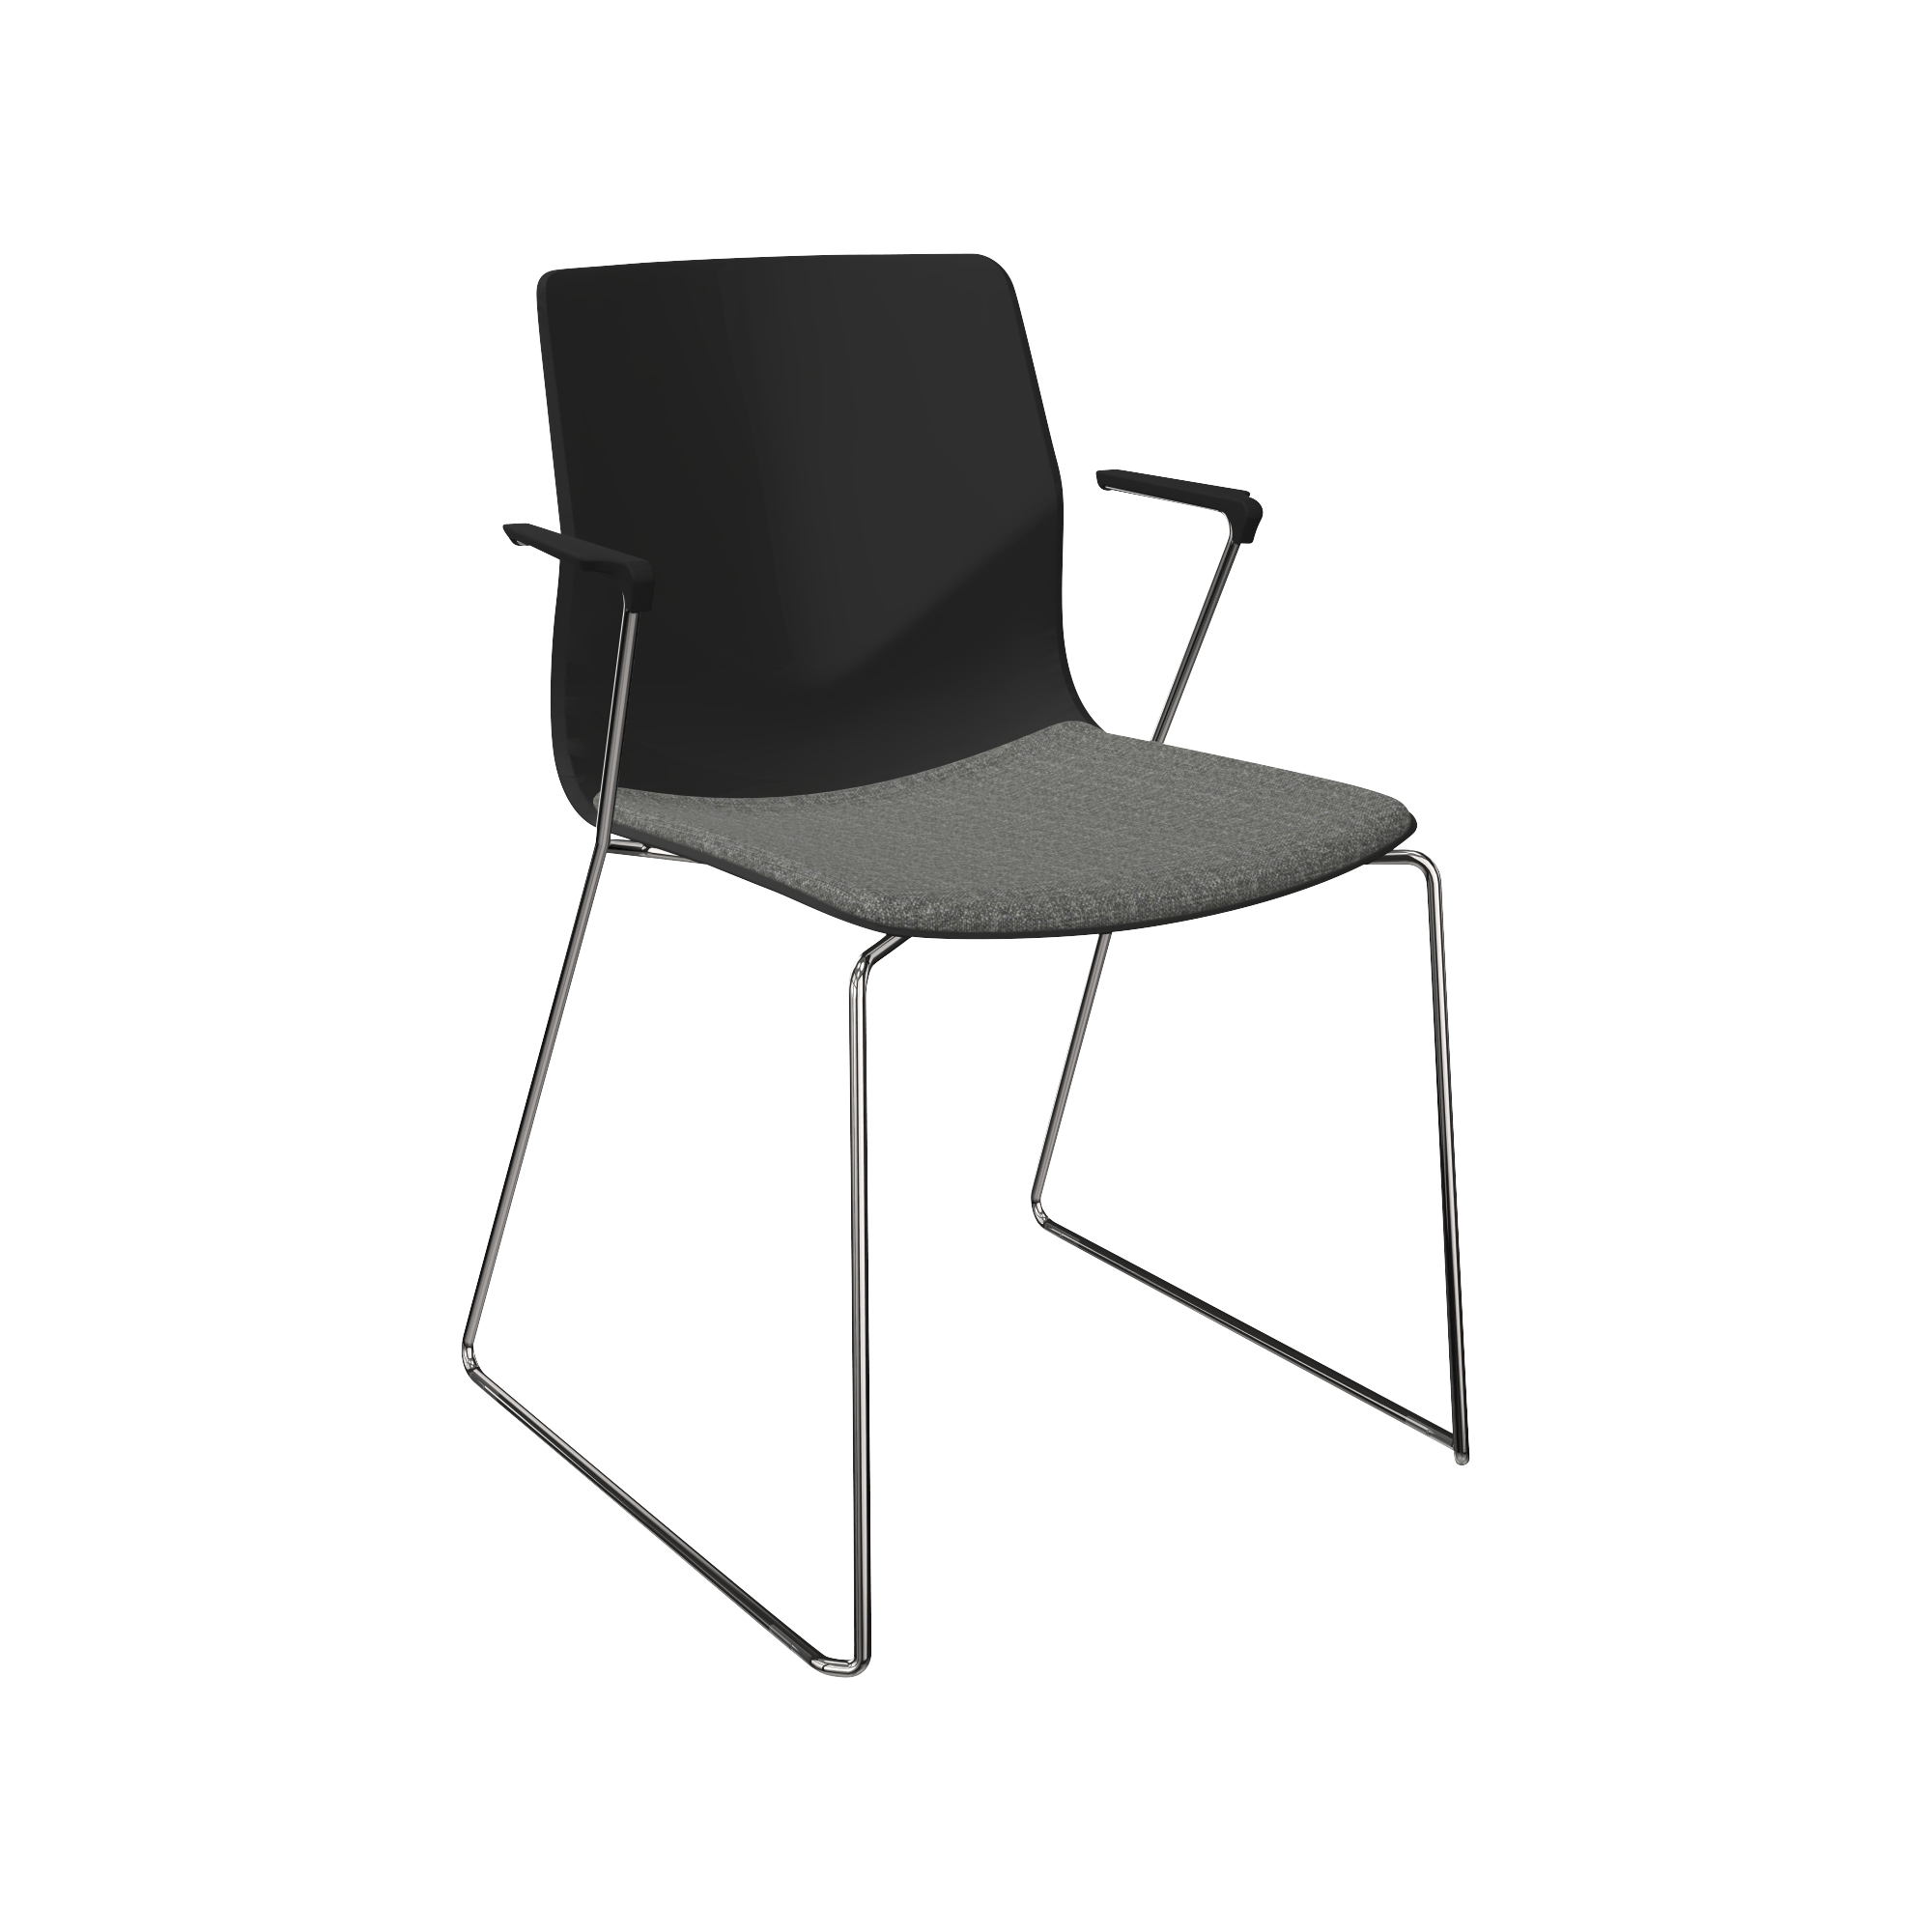 A gray chair with a metal frame